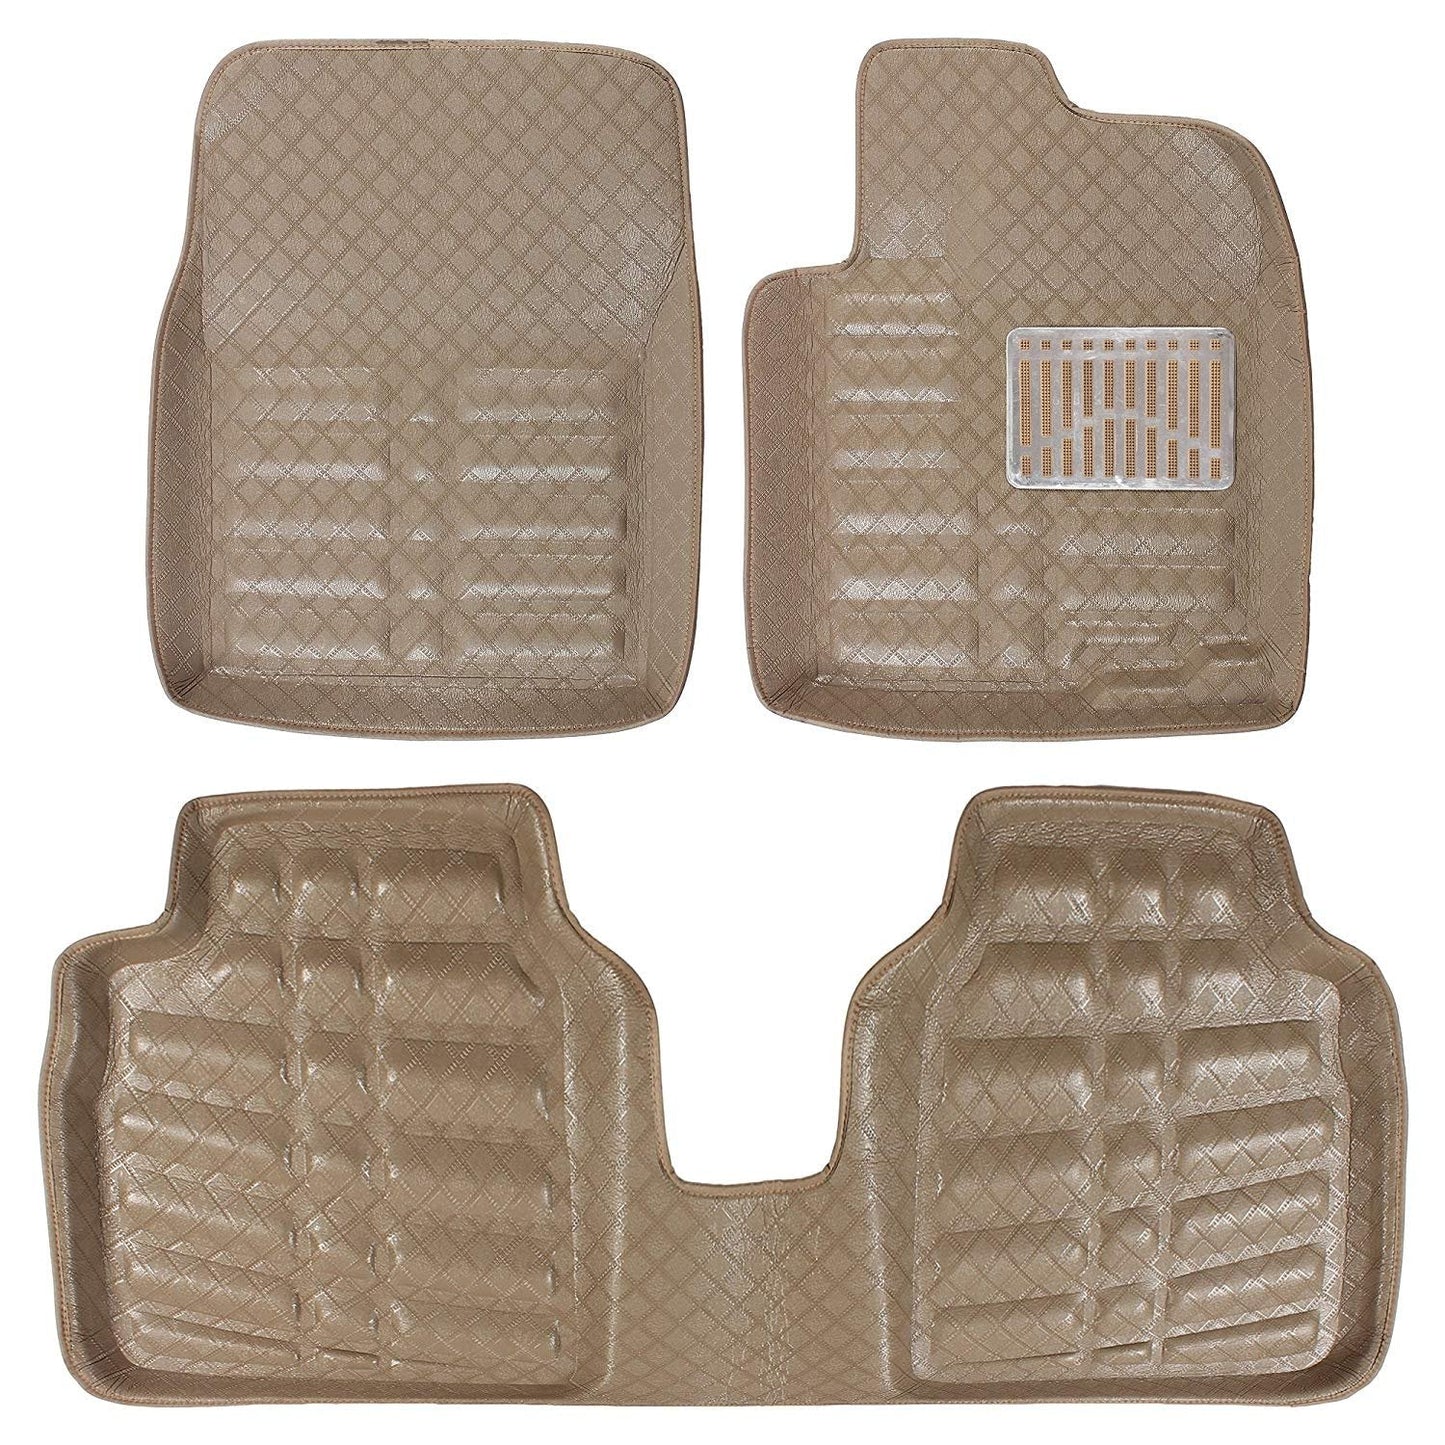 Oshotto 4D Artificial Leather Car Floor Mats For Tata Tigor - Set of 3 (2 pcs Front & one Long Single Rear pc) - Beige